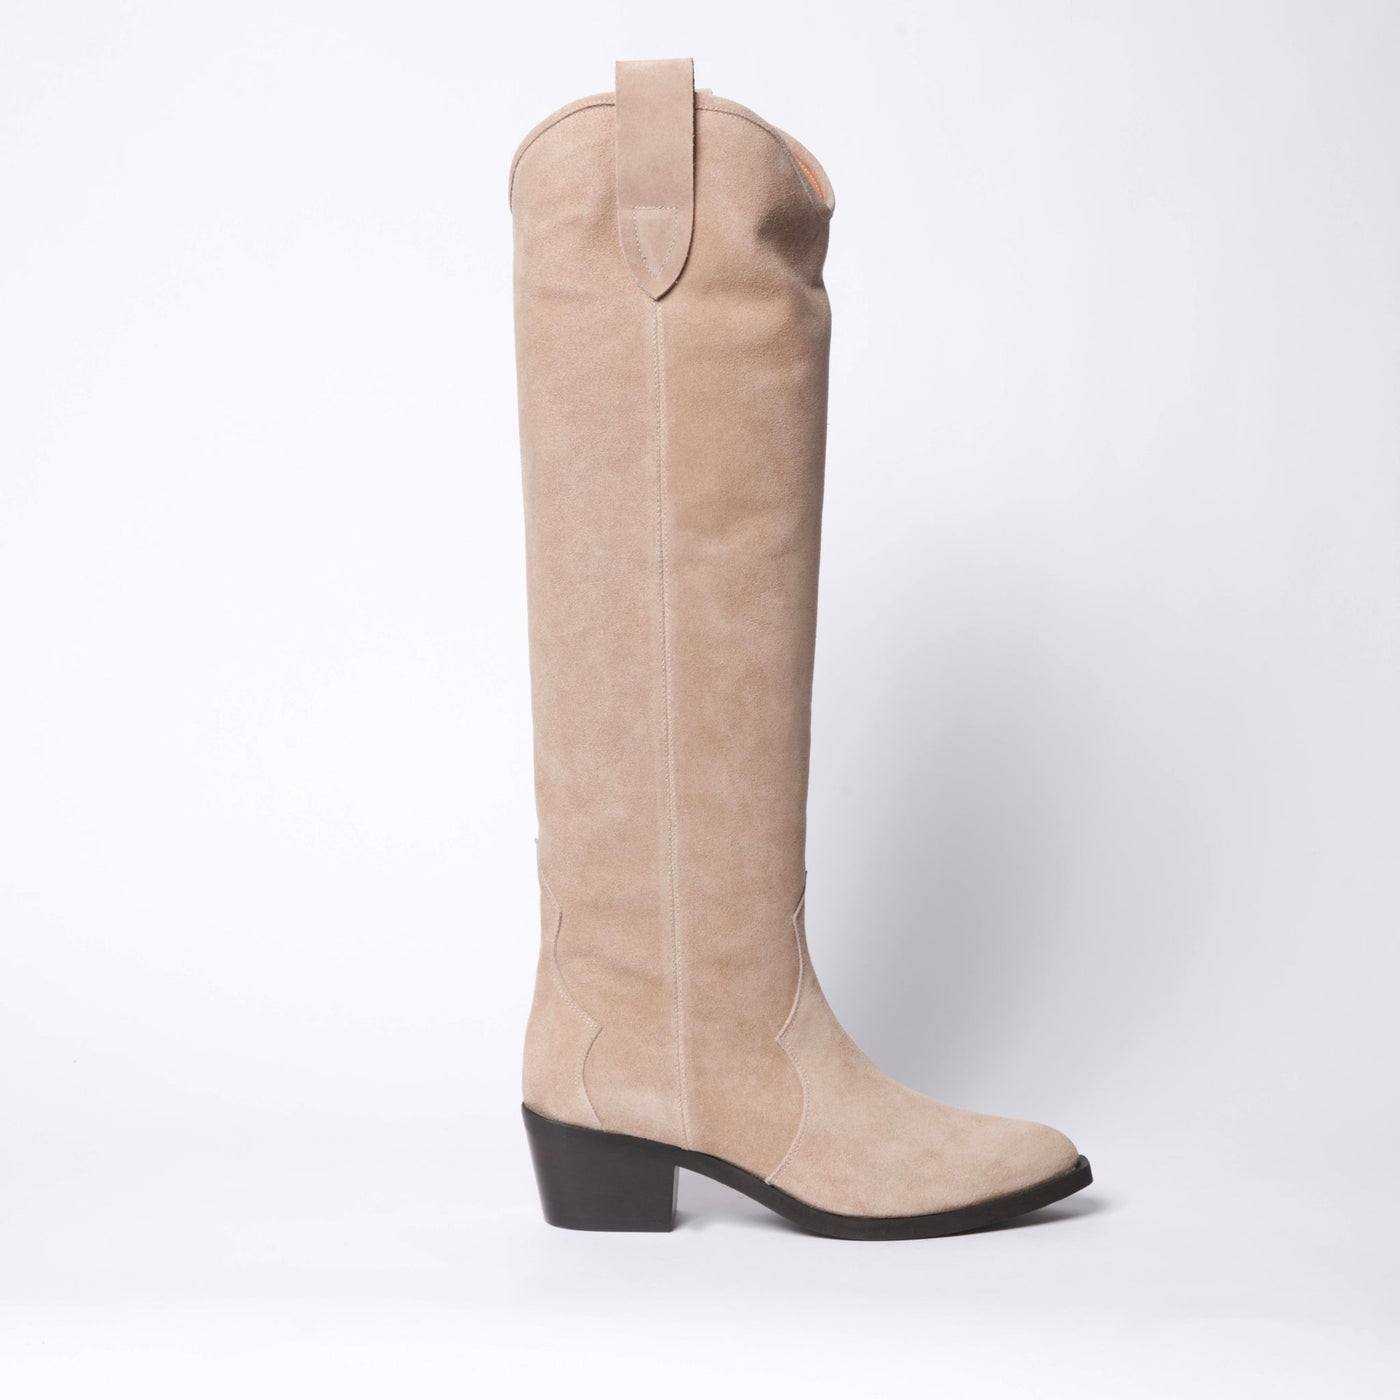 Cowboy boots in beige suede leather. 